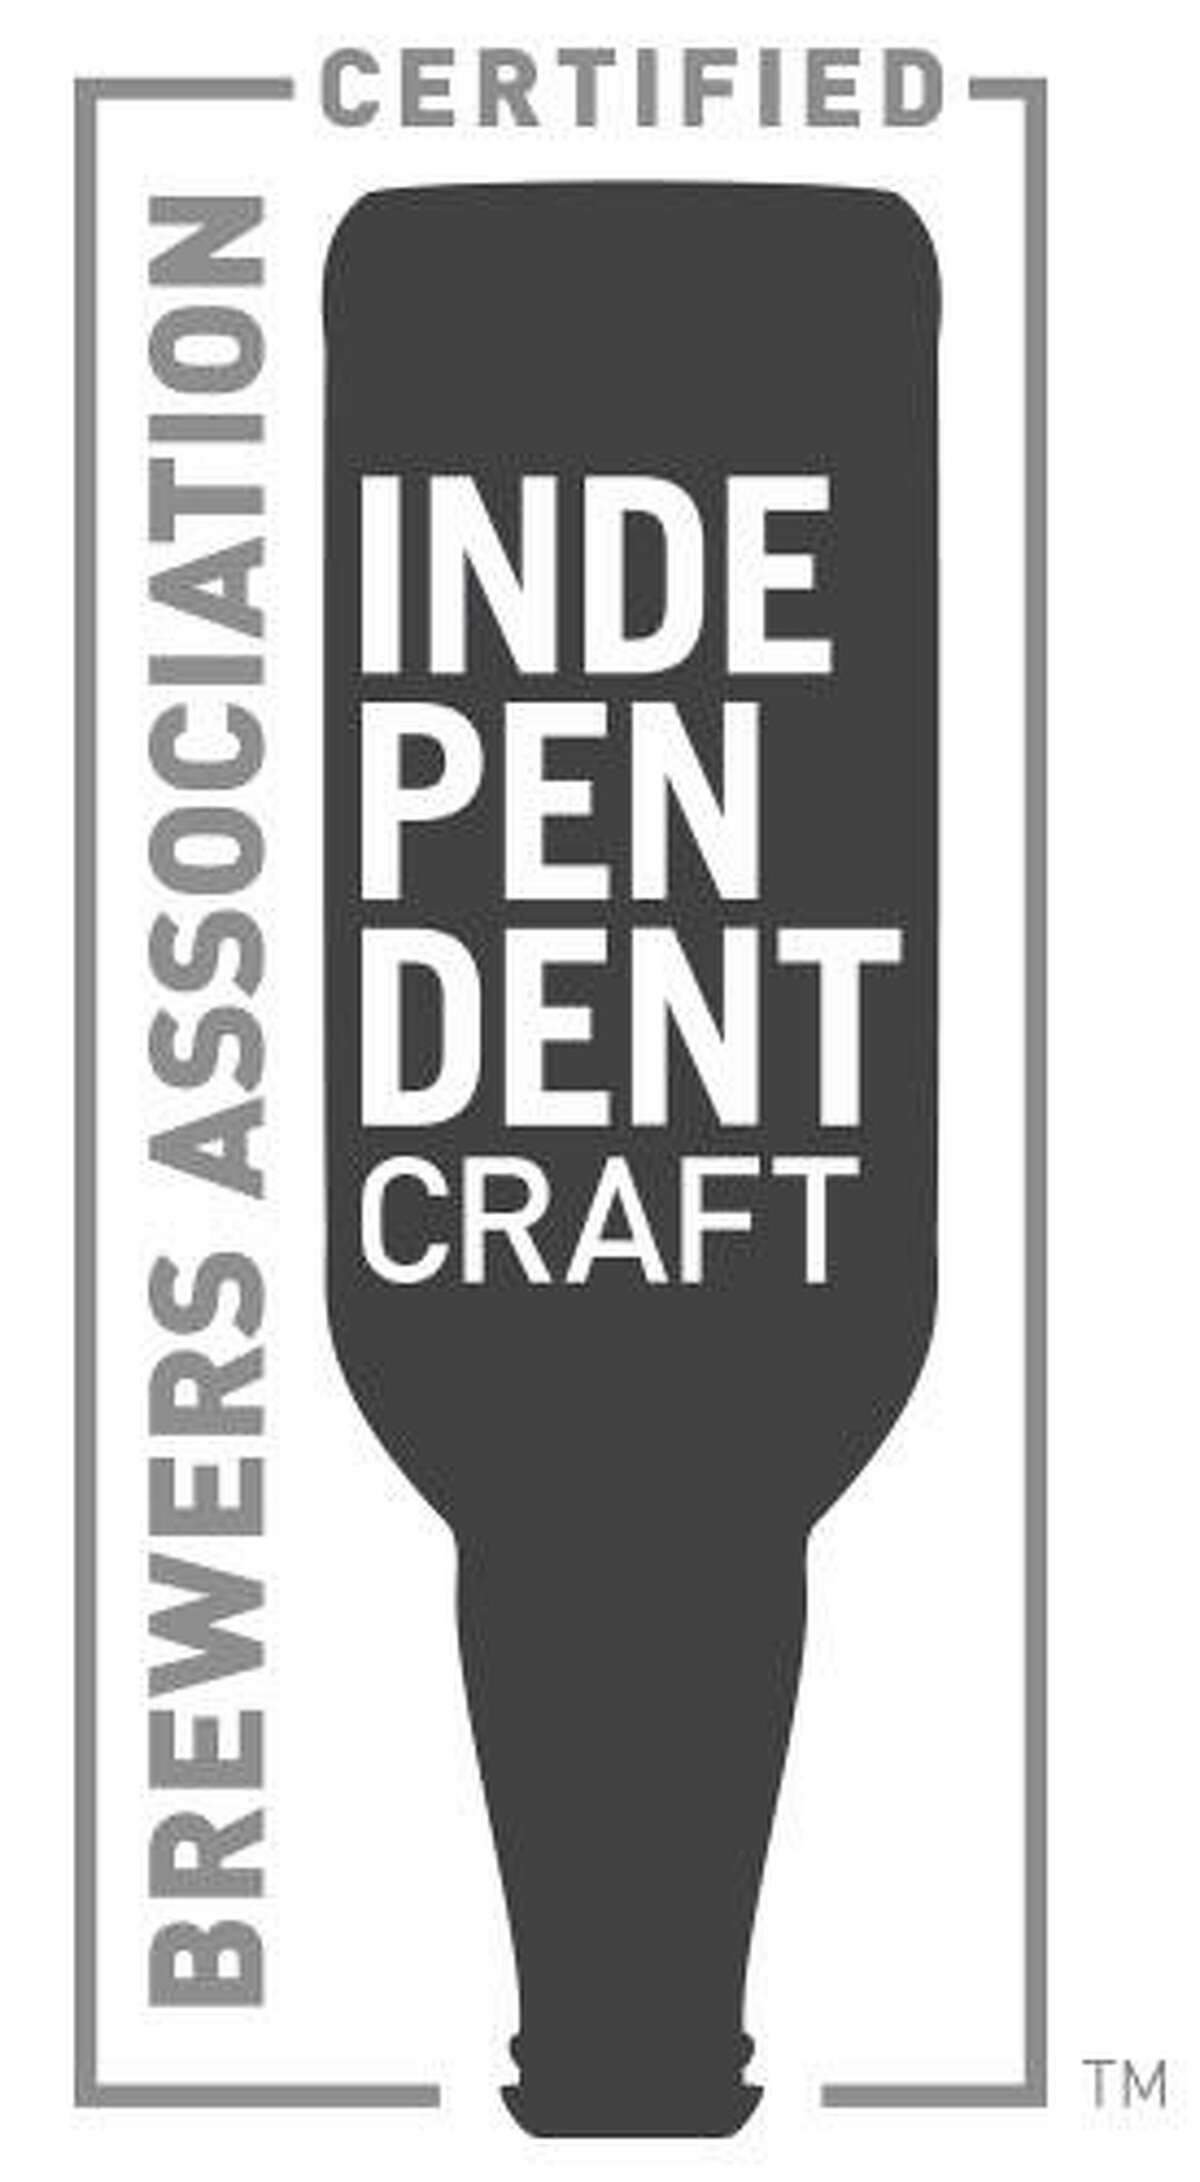 The logo for the Brewers Association campaign to make beer from independent breweries recognizable to the consumer features an upside down bottle, which the Association says represents how craft beer has upended the beer industry.